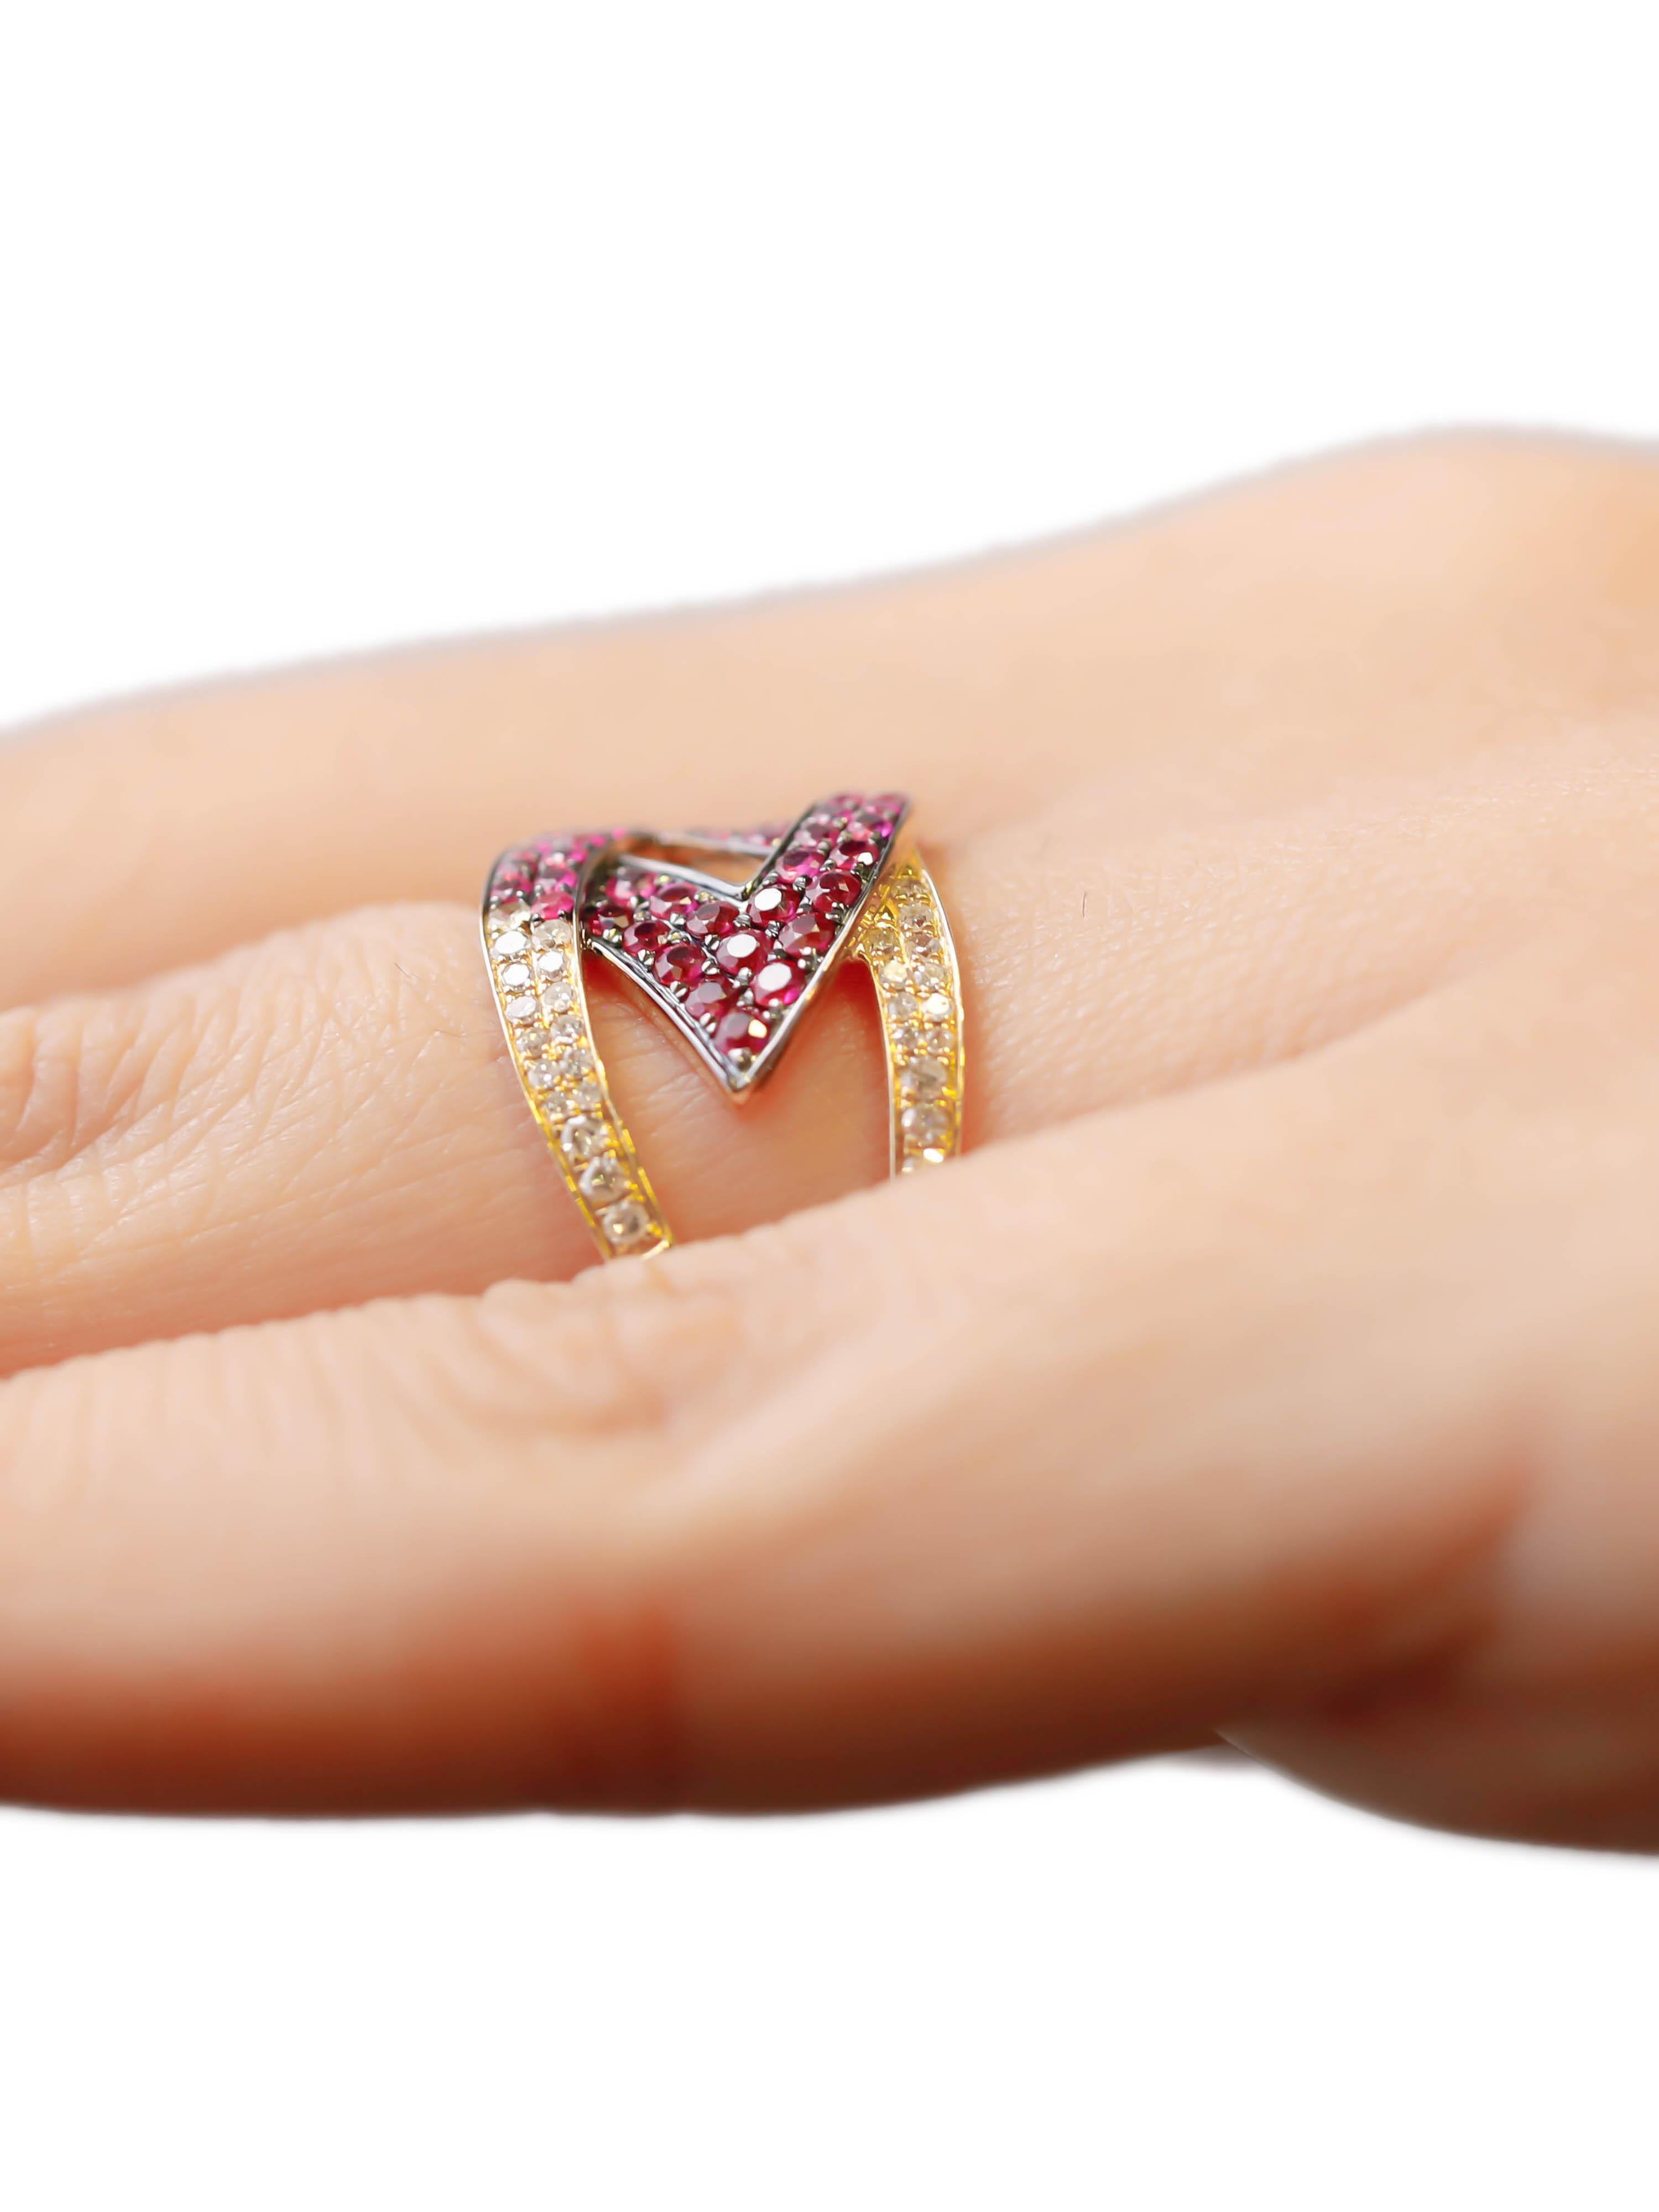 0.25 Carat Round Cut Diamond 0.62 Carat Ruby Pave 14k Yellow Gold Wrap Ring  For Sale 1